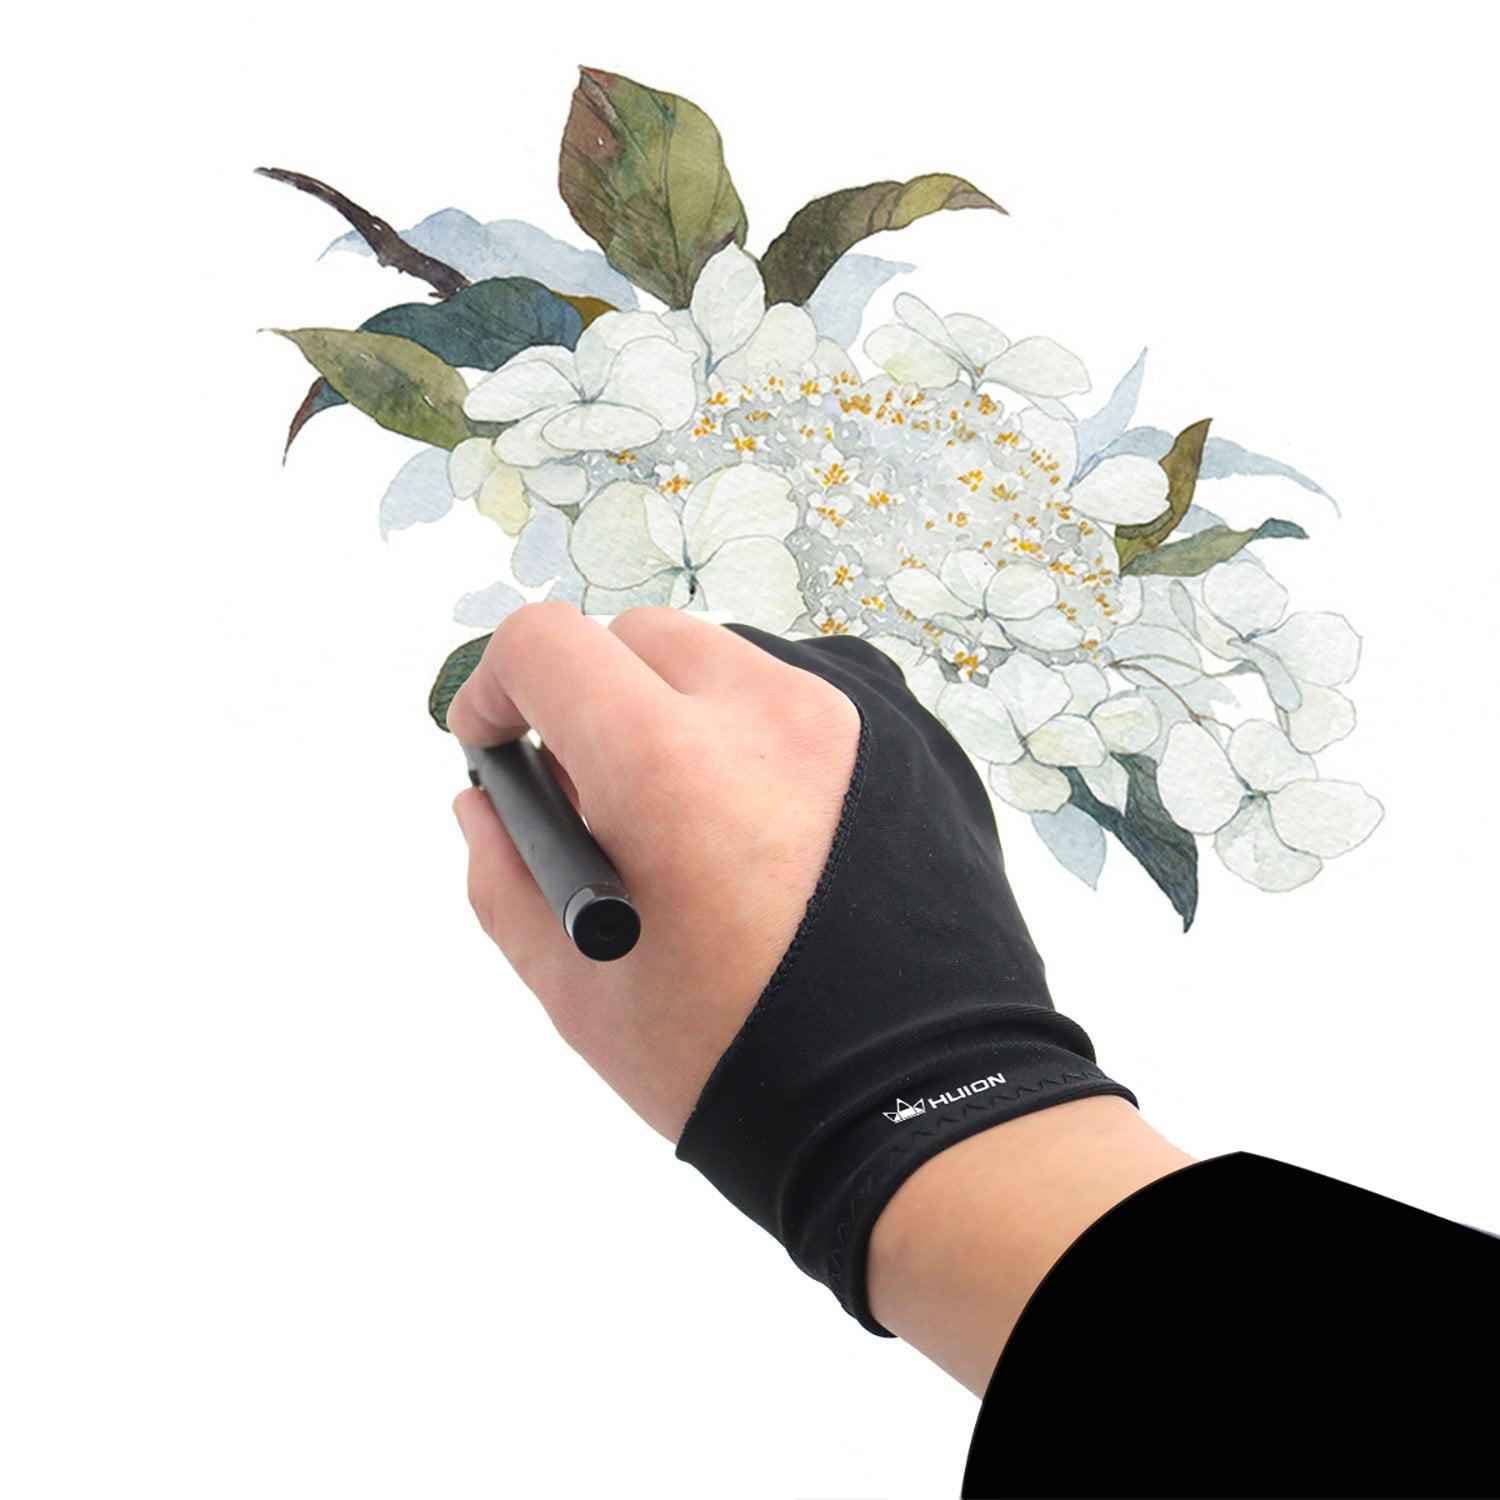 Professional Free Size Artist Drawing Glove for Huion Graphic Tablet Drawing 